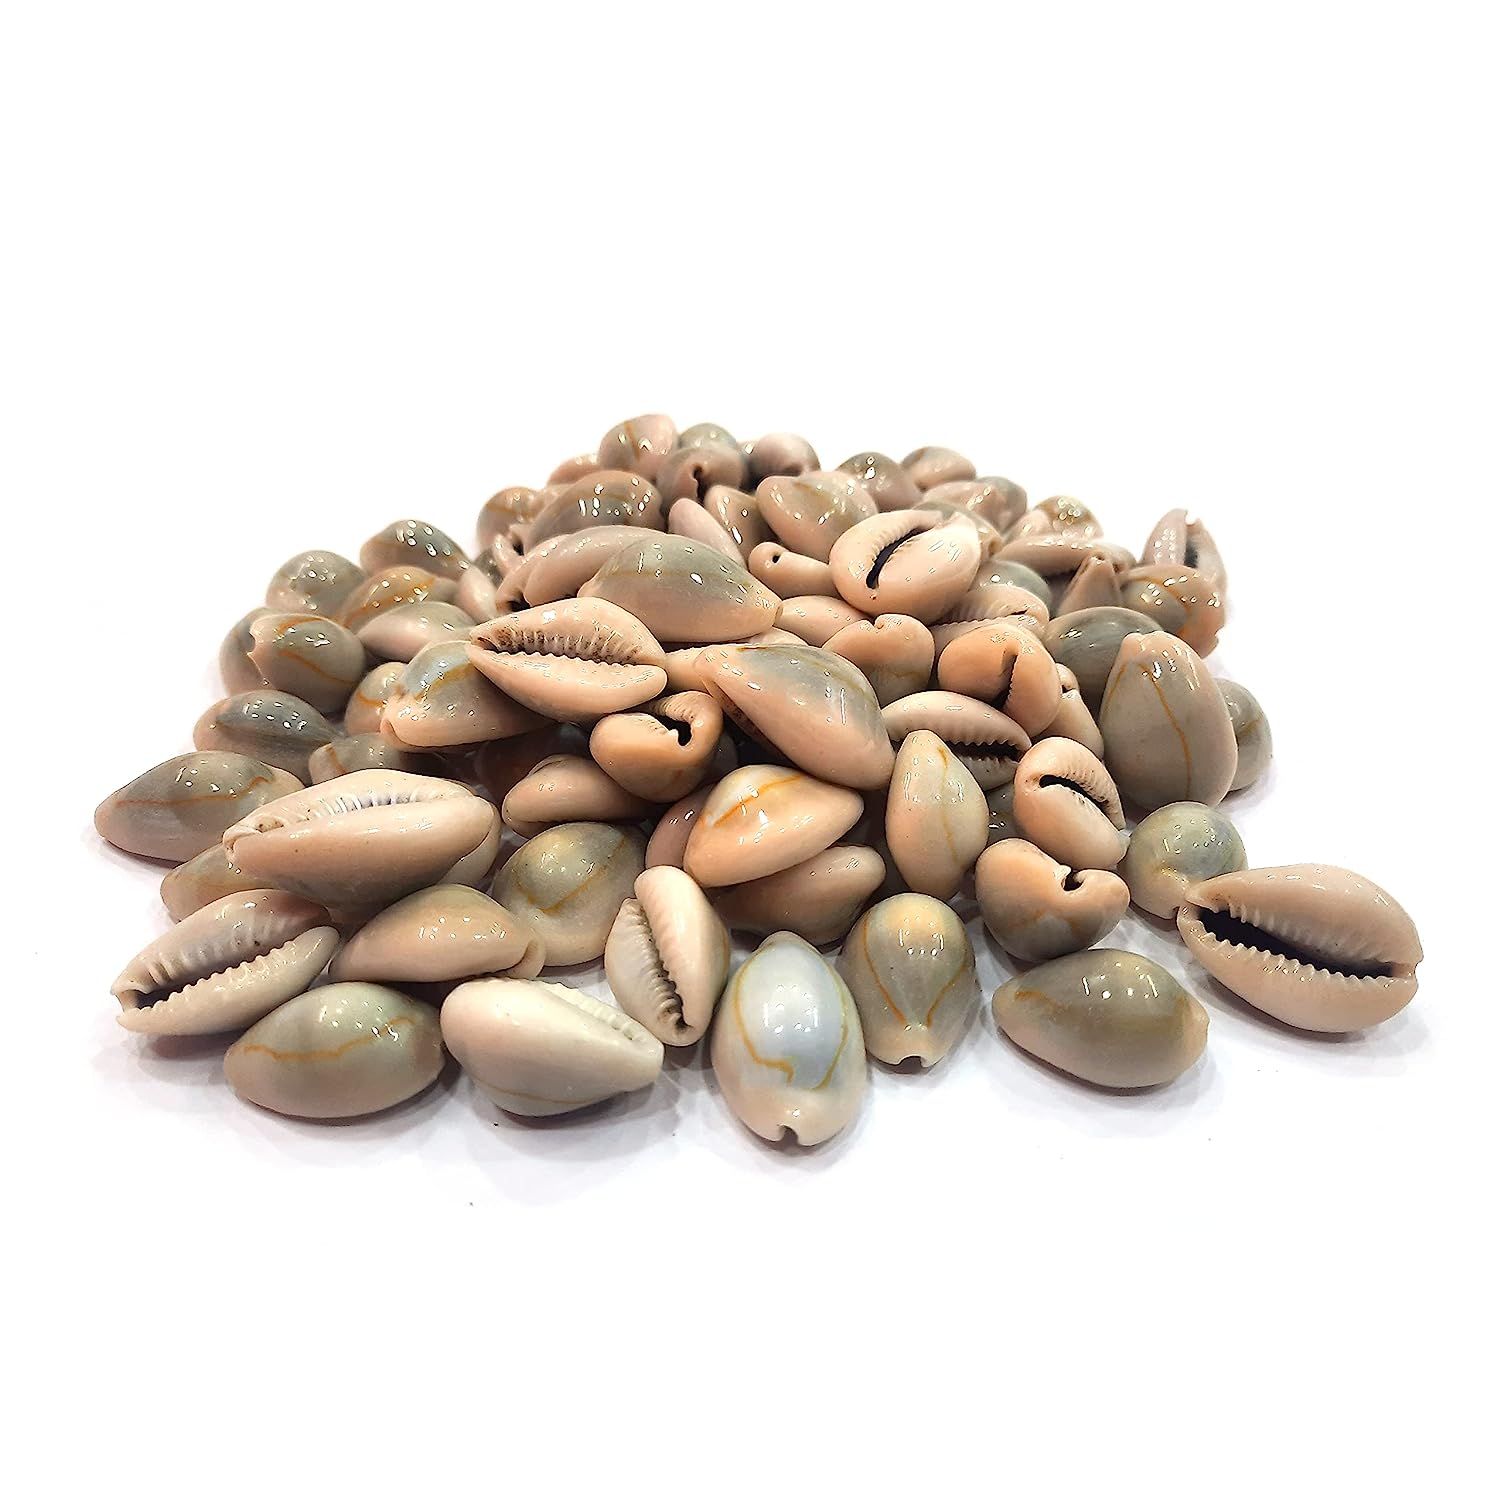 Cats Eye Cowrie / Kaudi Shells Size – 3 Cms Pack of 100